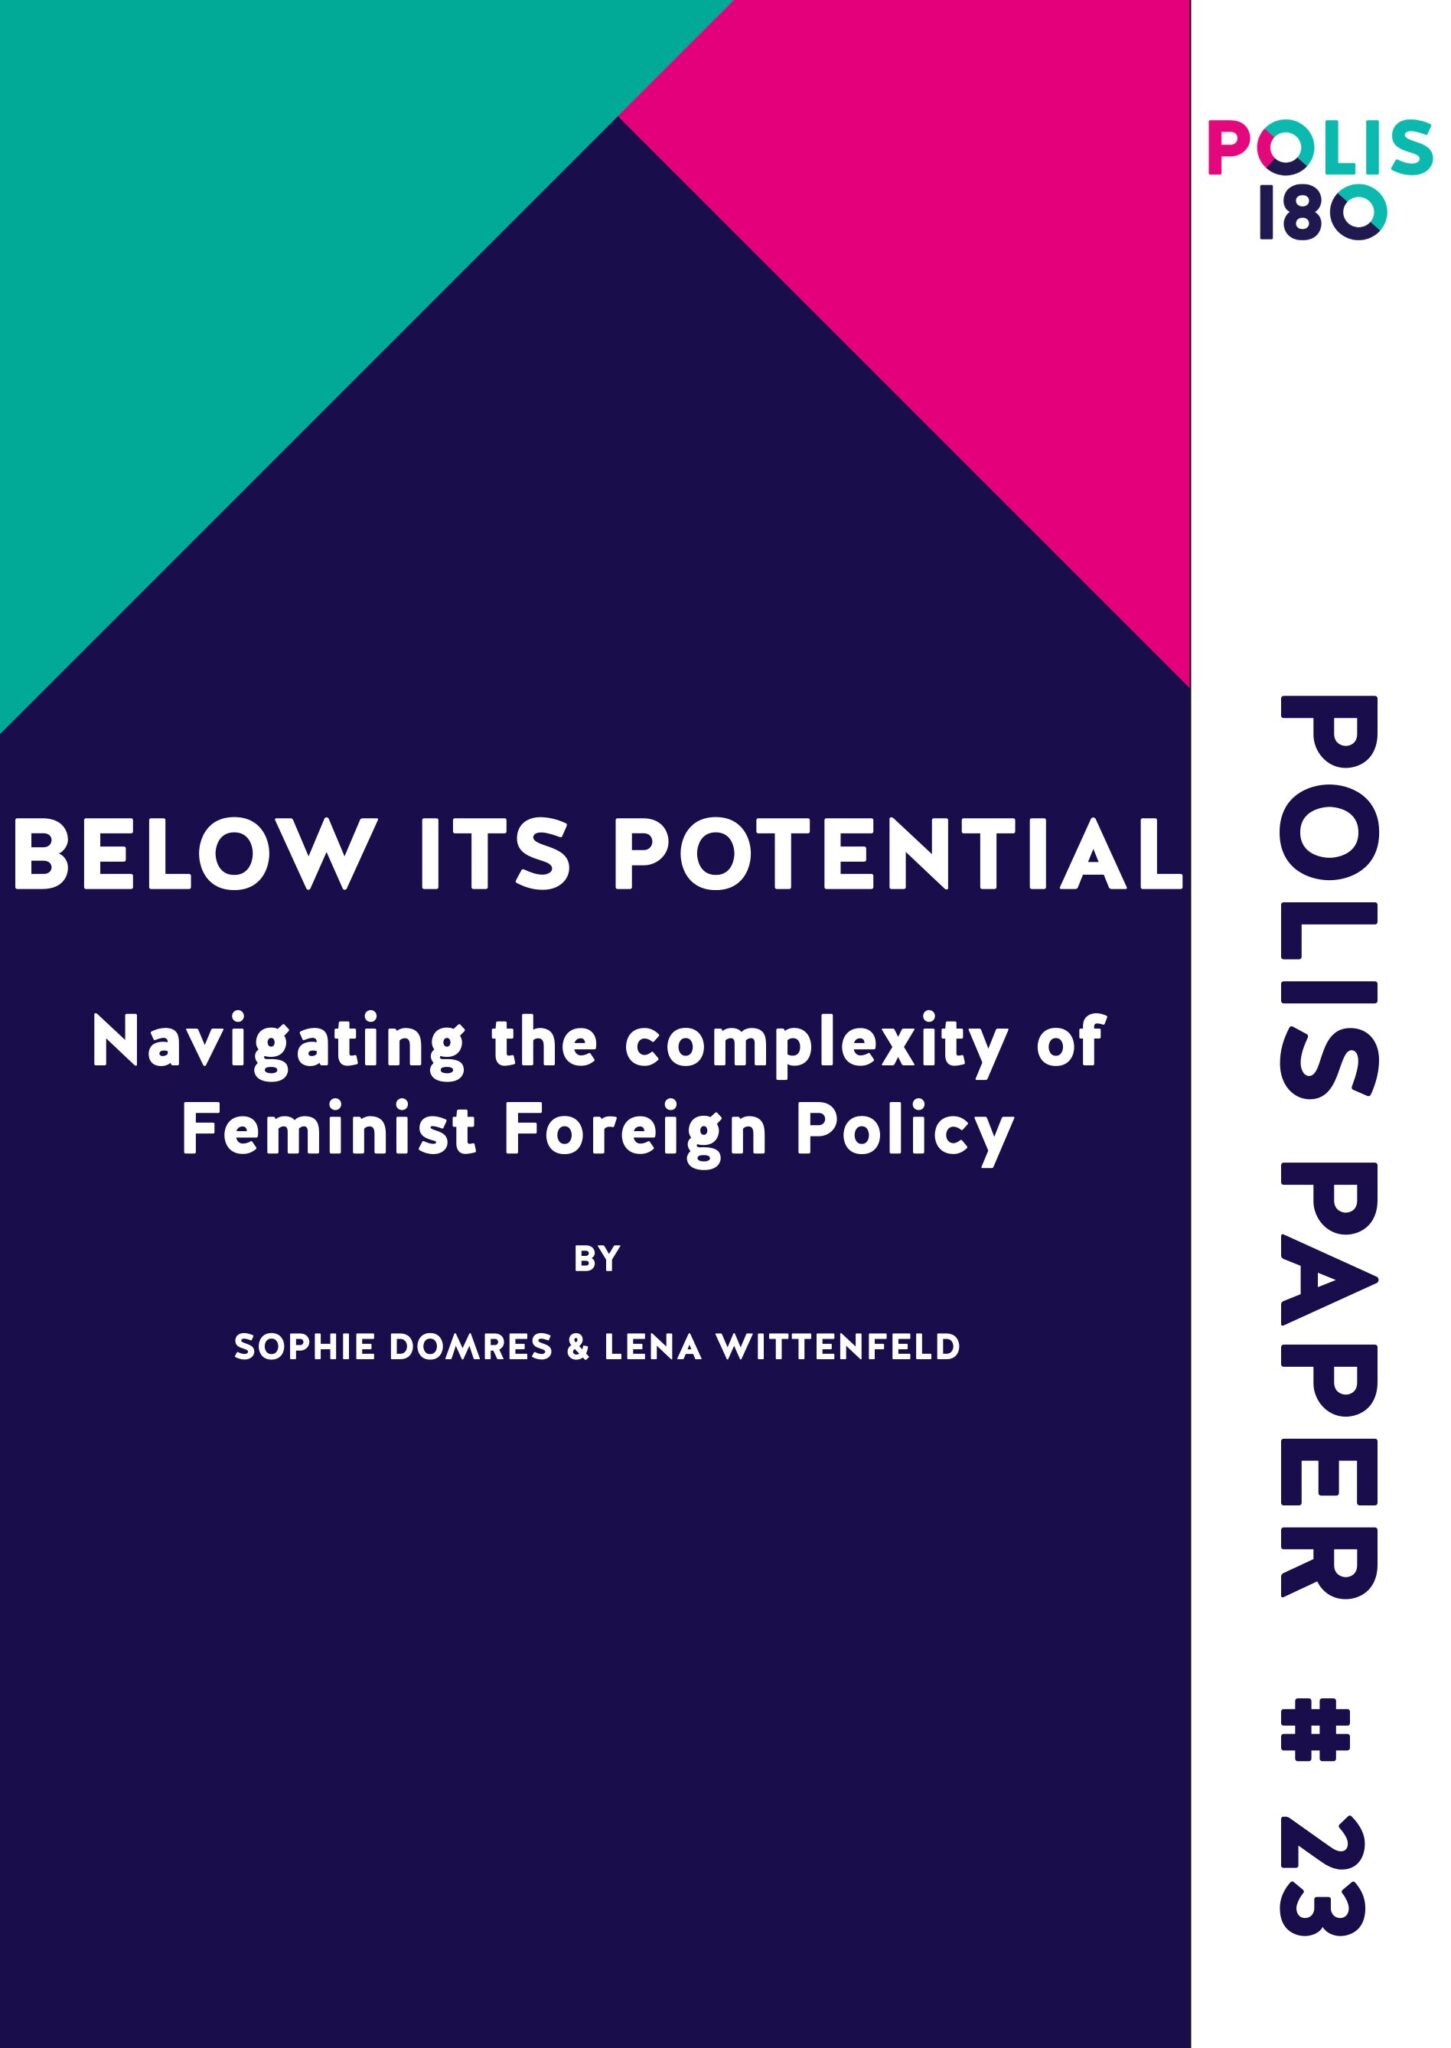 Polis Paper N° 23 - Below its potential - Navigating the complexity of Feminist Foreign Policy